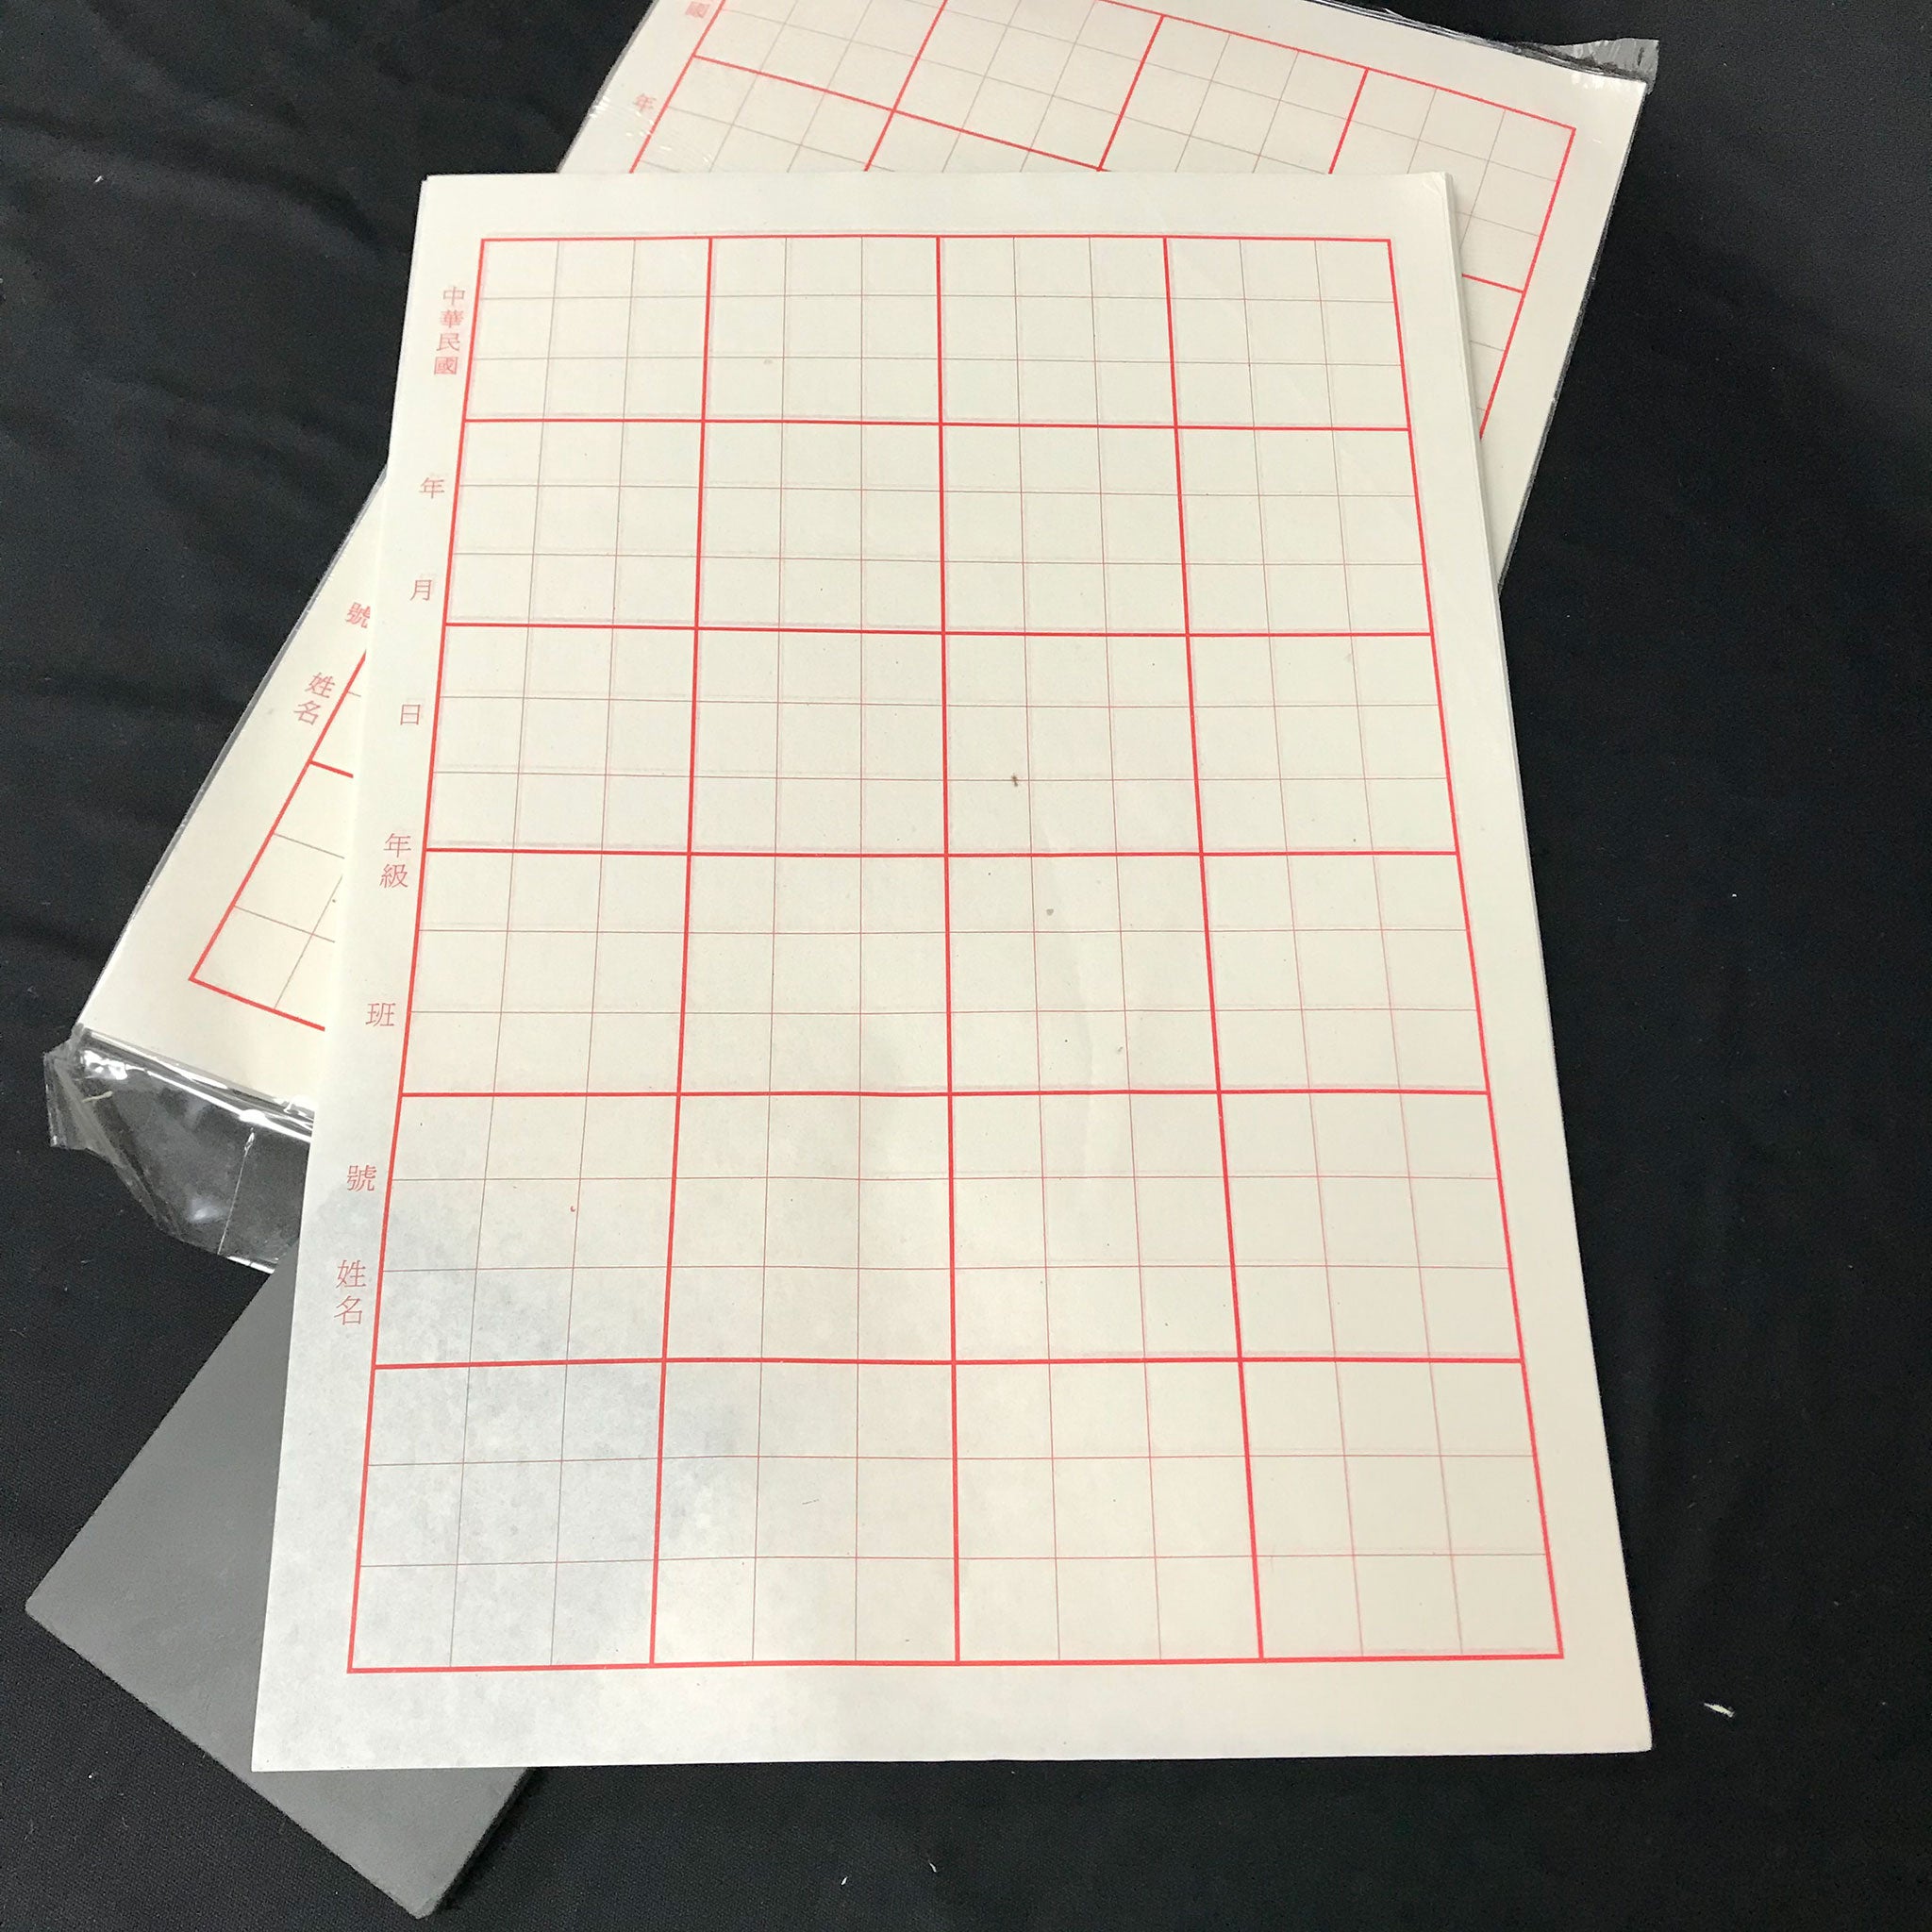 Chinese Calligraphy Practice Sumi Paper with Grids, Rice Paper for Practice  Chinese Japanese Calligraphy 9cm 12 Grids 70Pcs